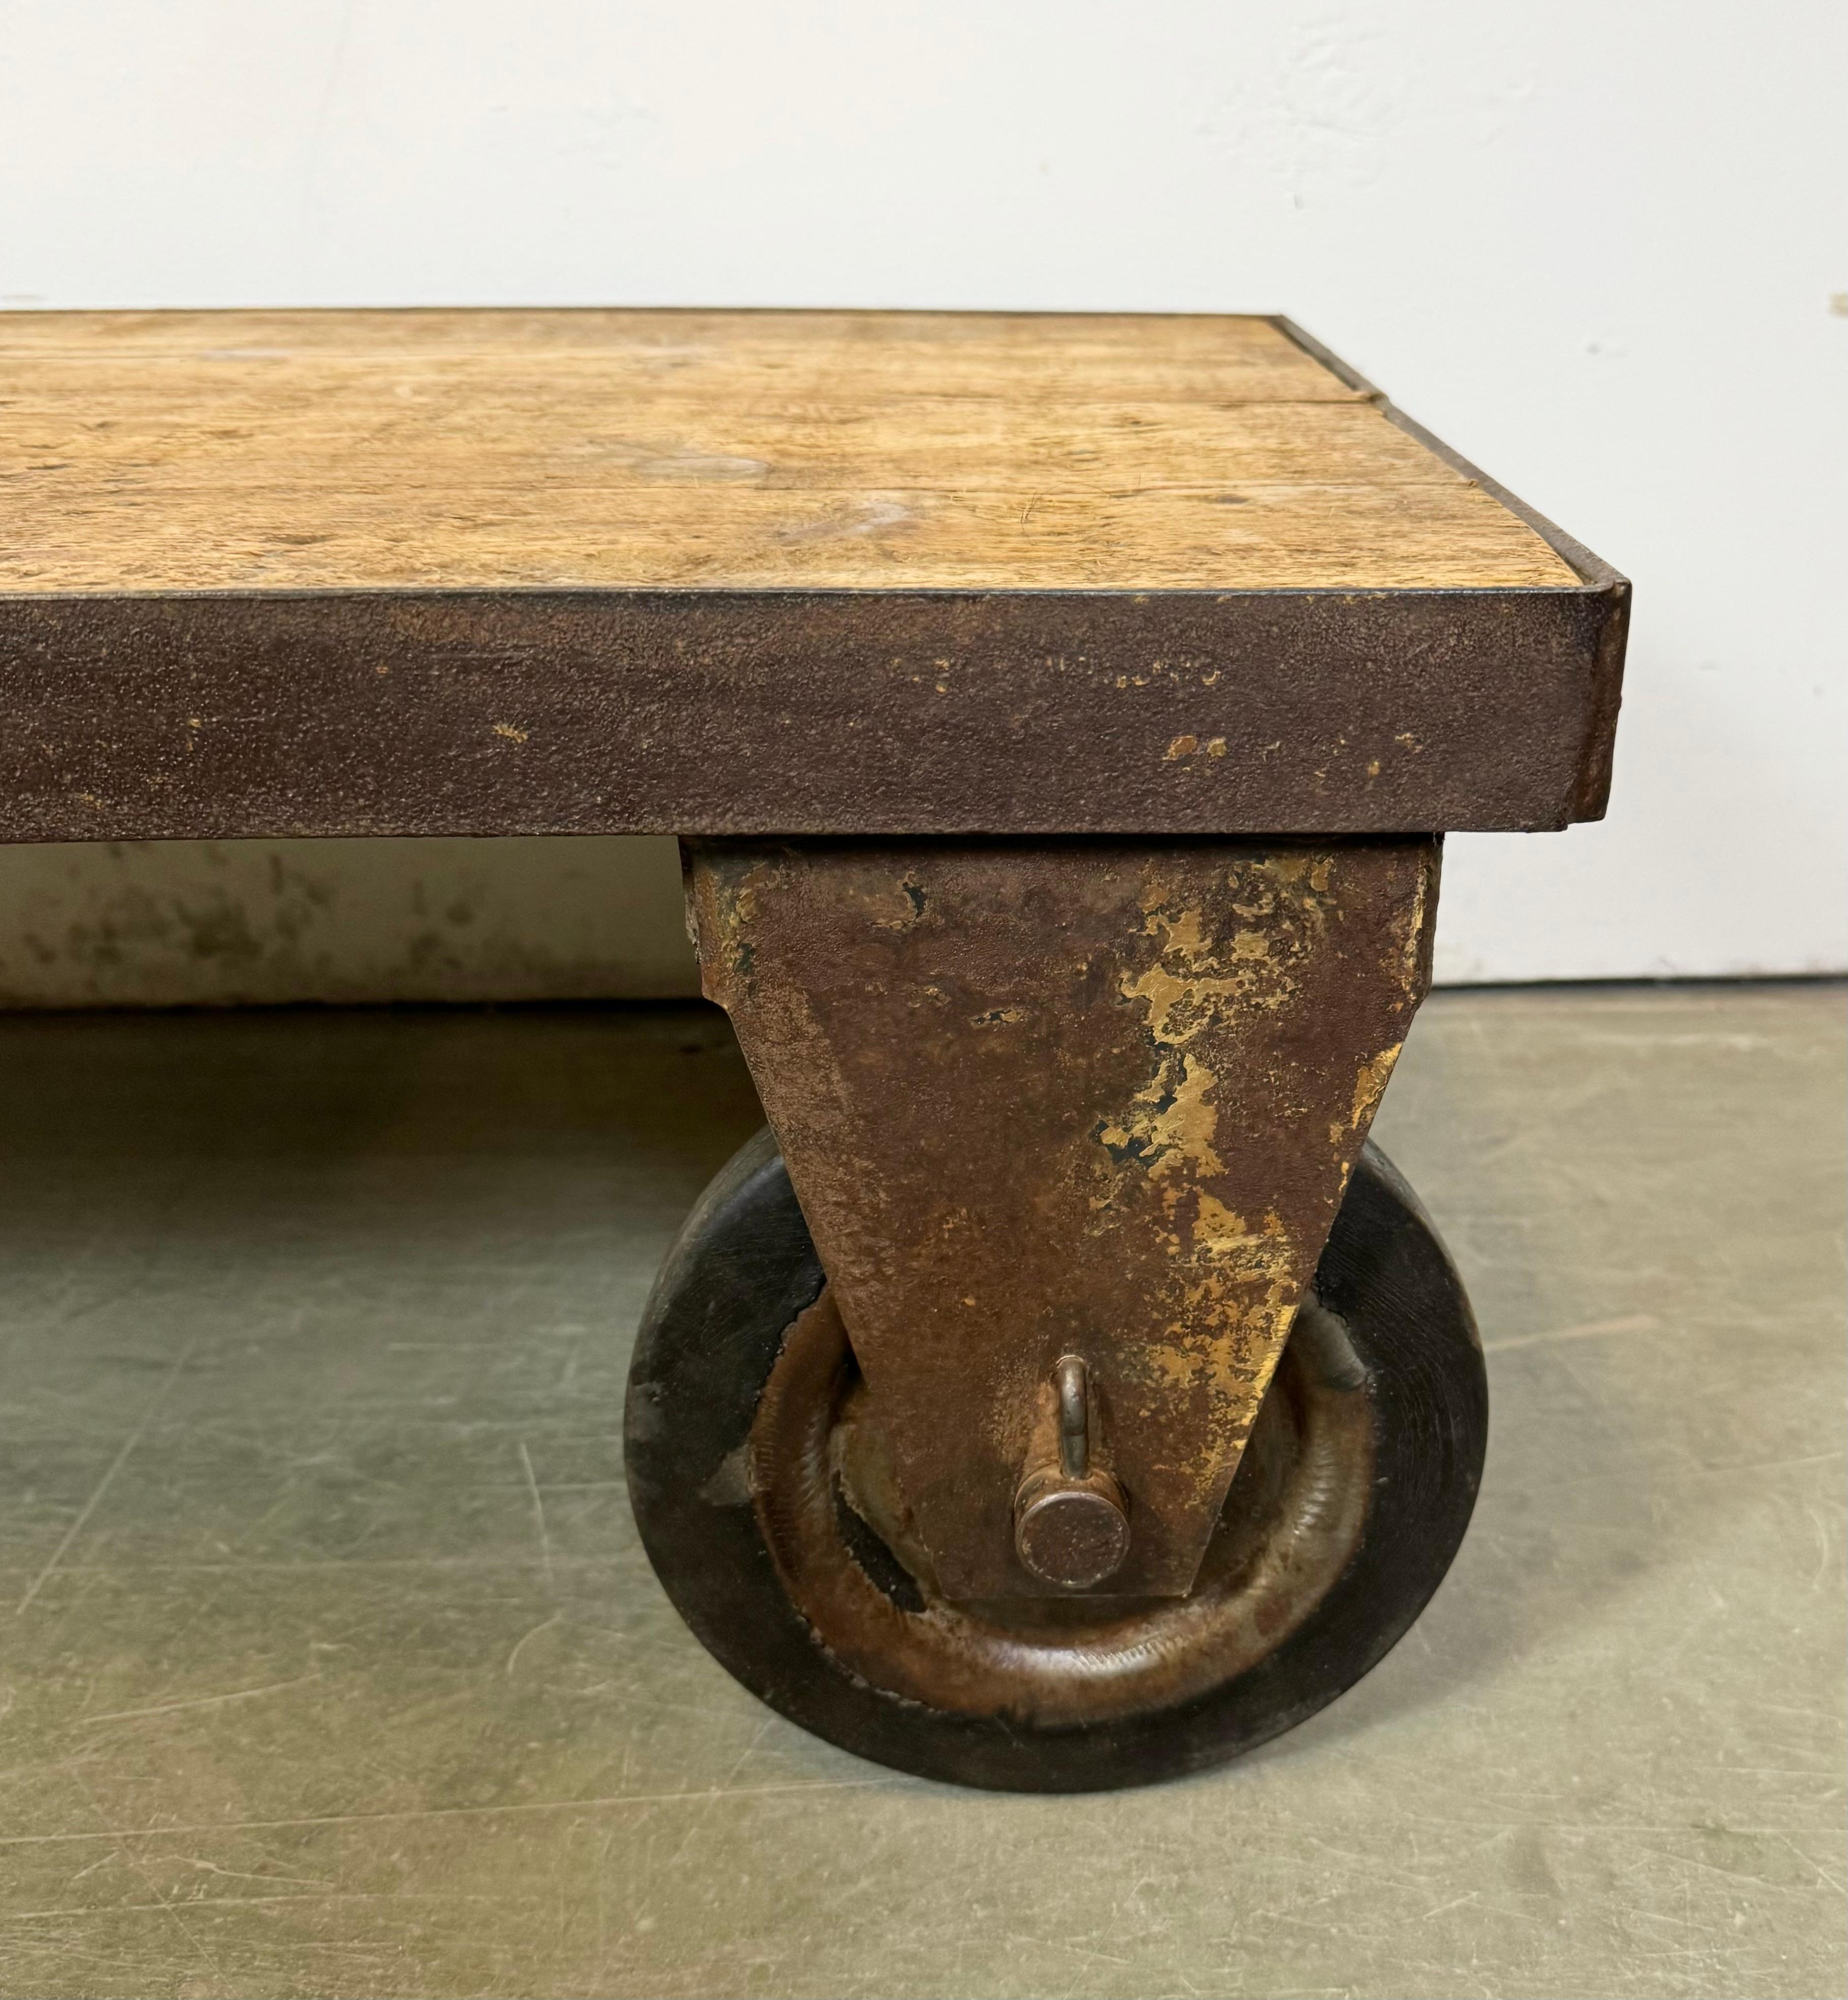 Czech Yellow Industrial Coffee Table Cart, 1960s For Sale